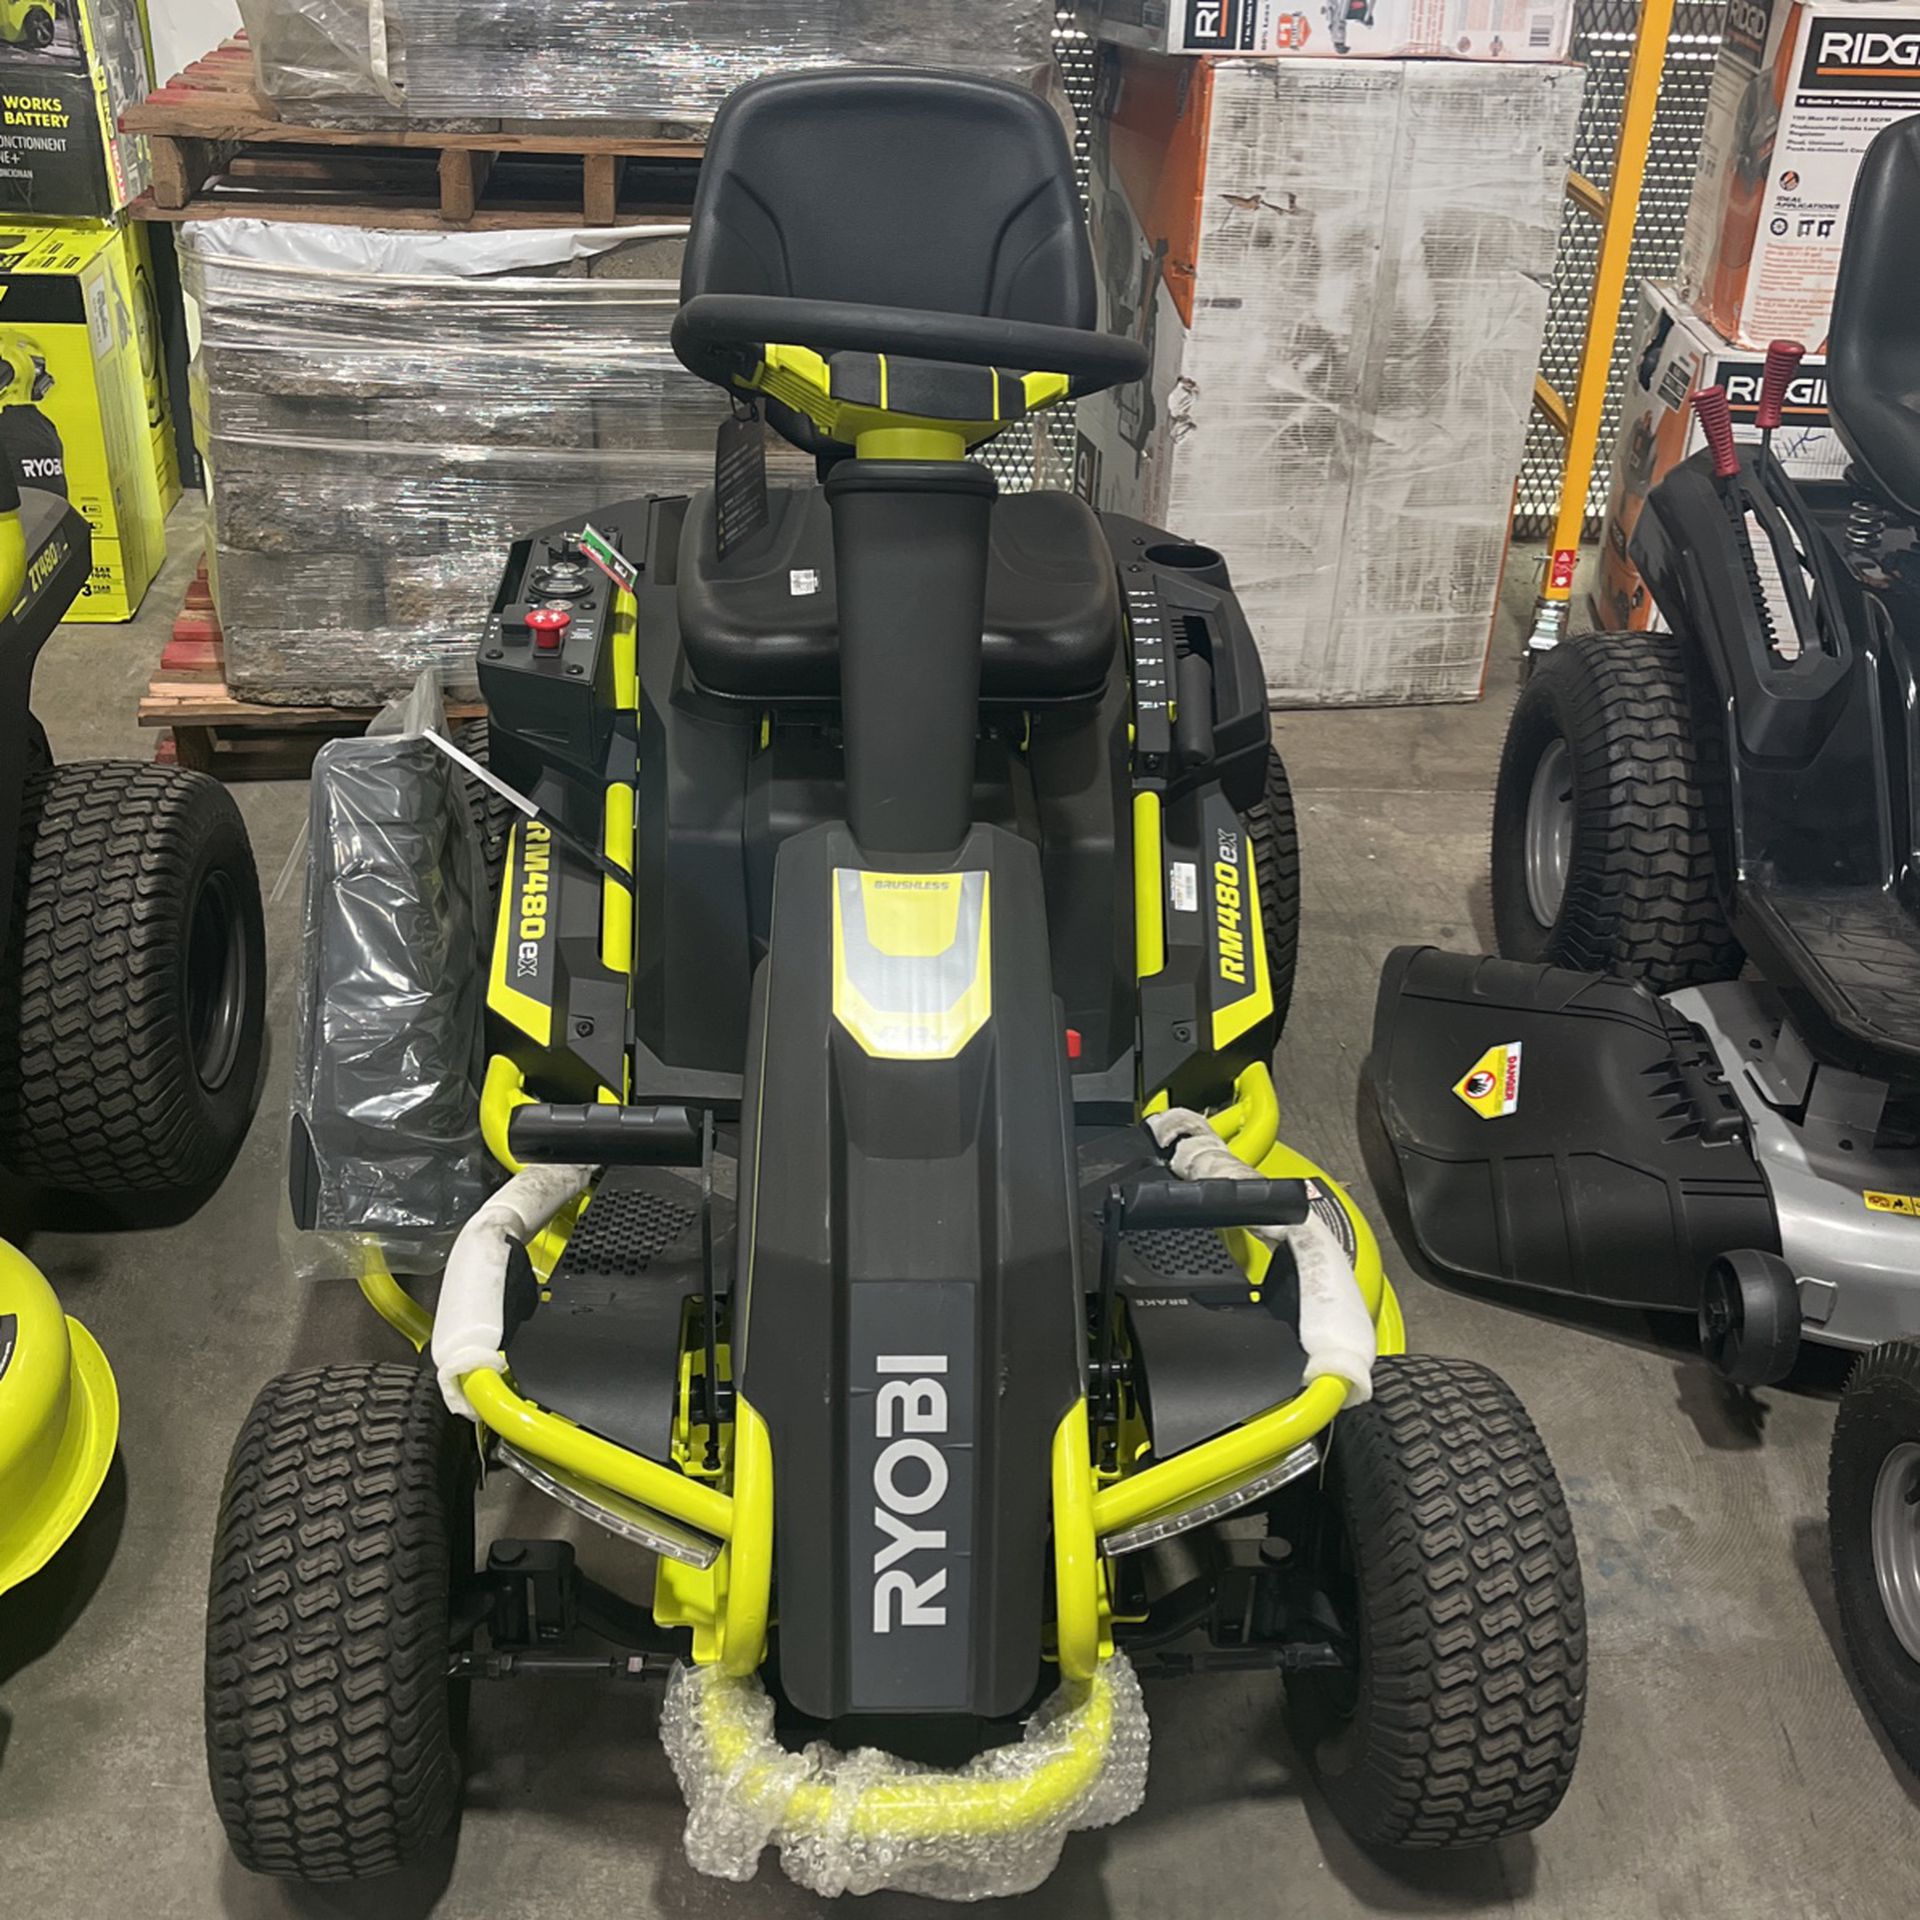 Ryobi 45V Brushless 38 in. 100 Ah Battery Electric Rear Engine Riding Lawn Mower